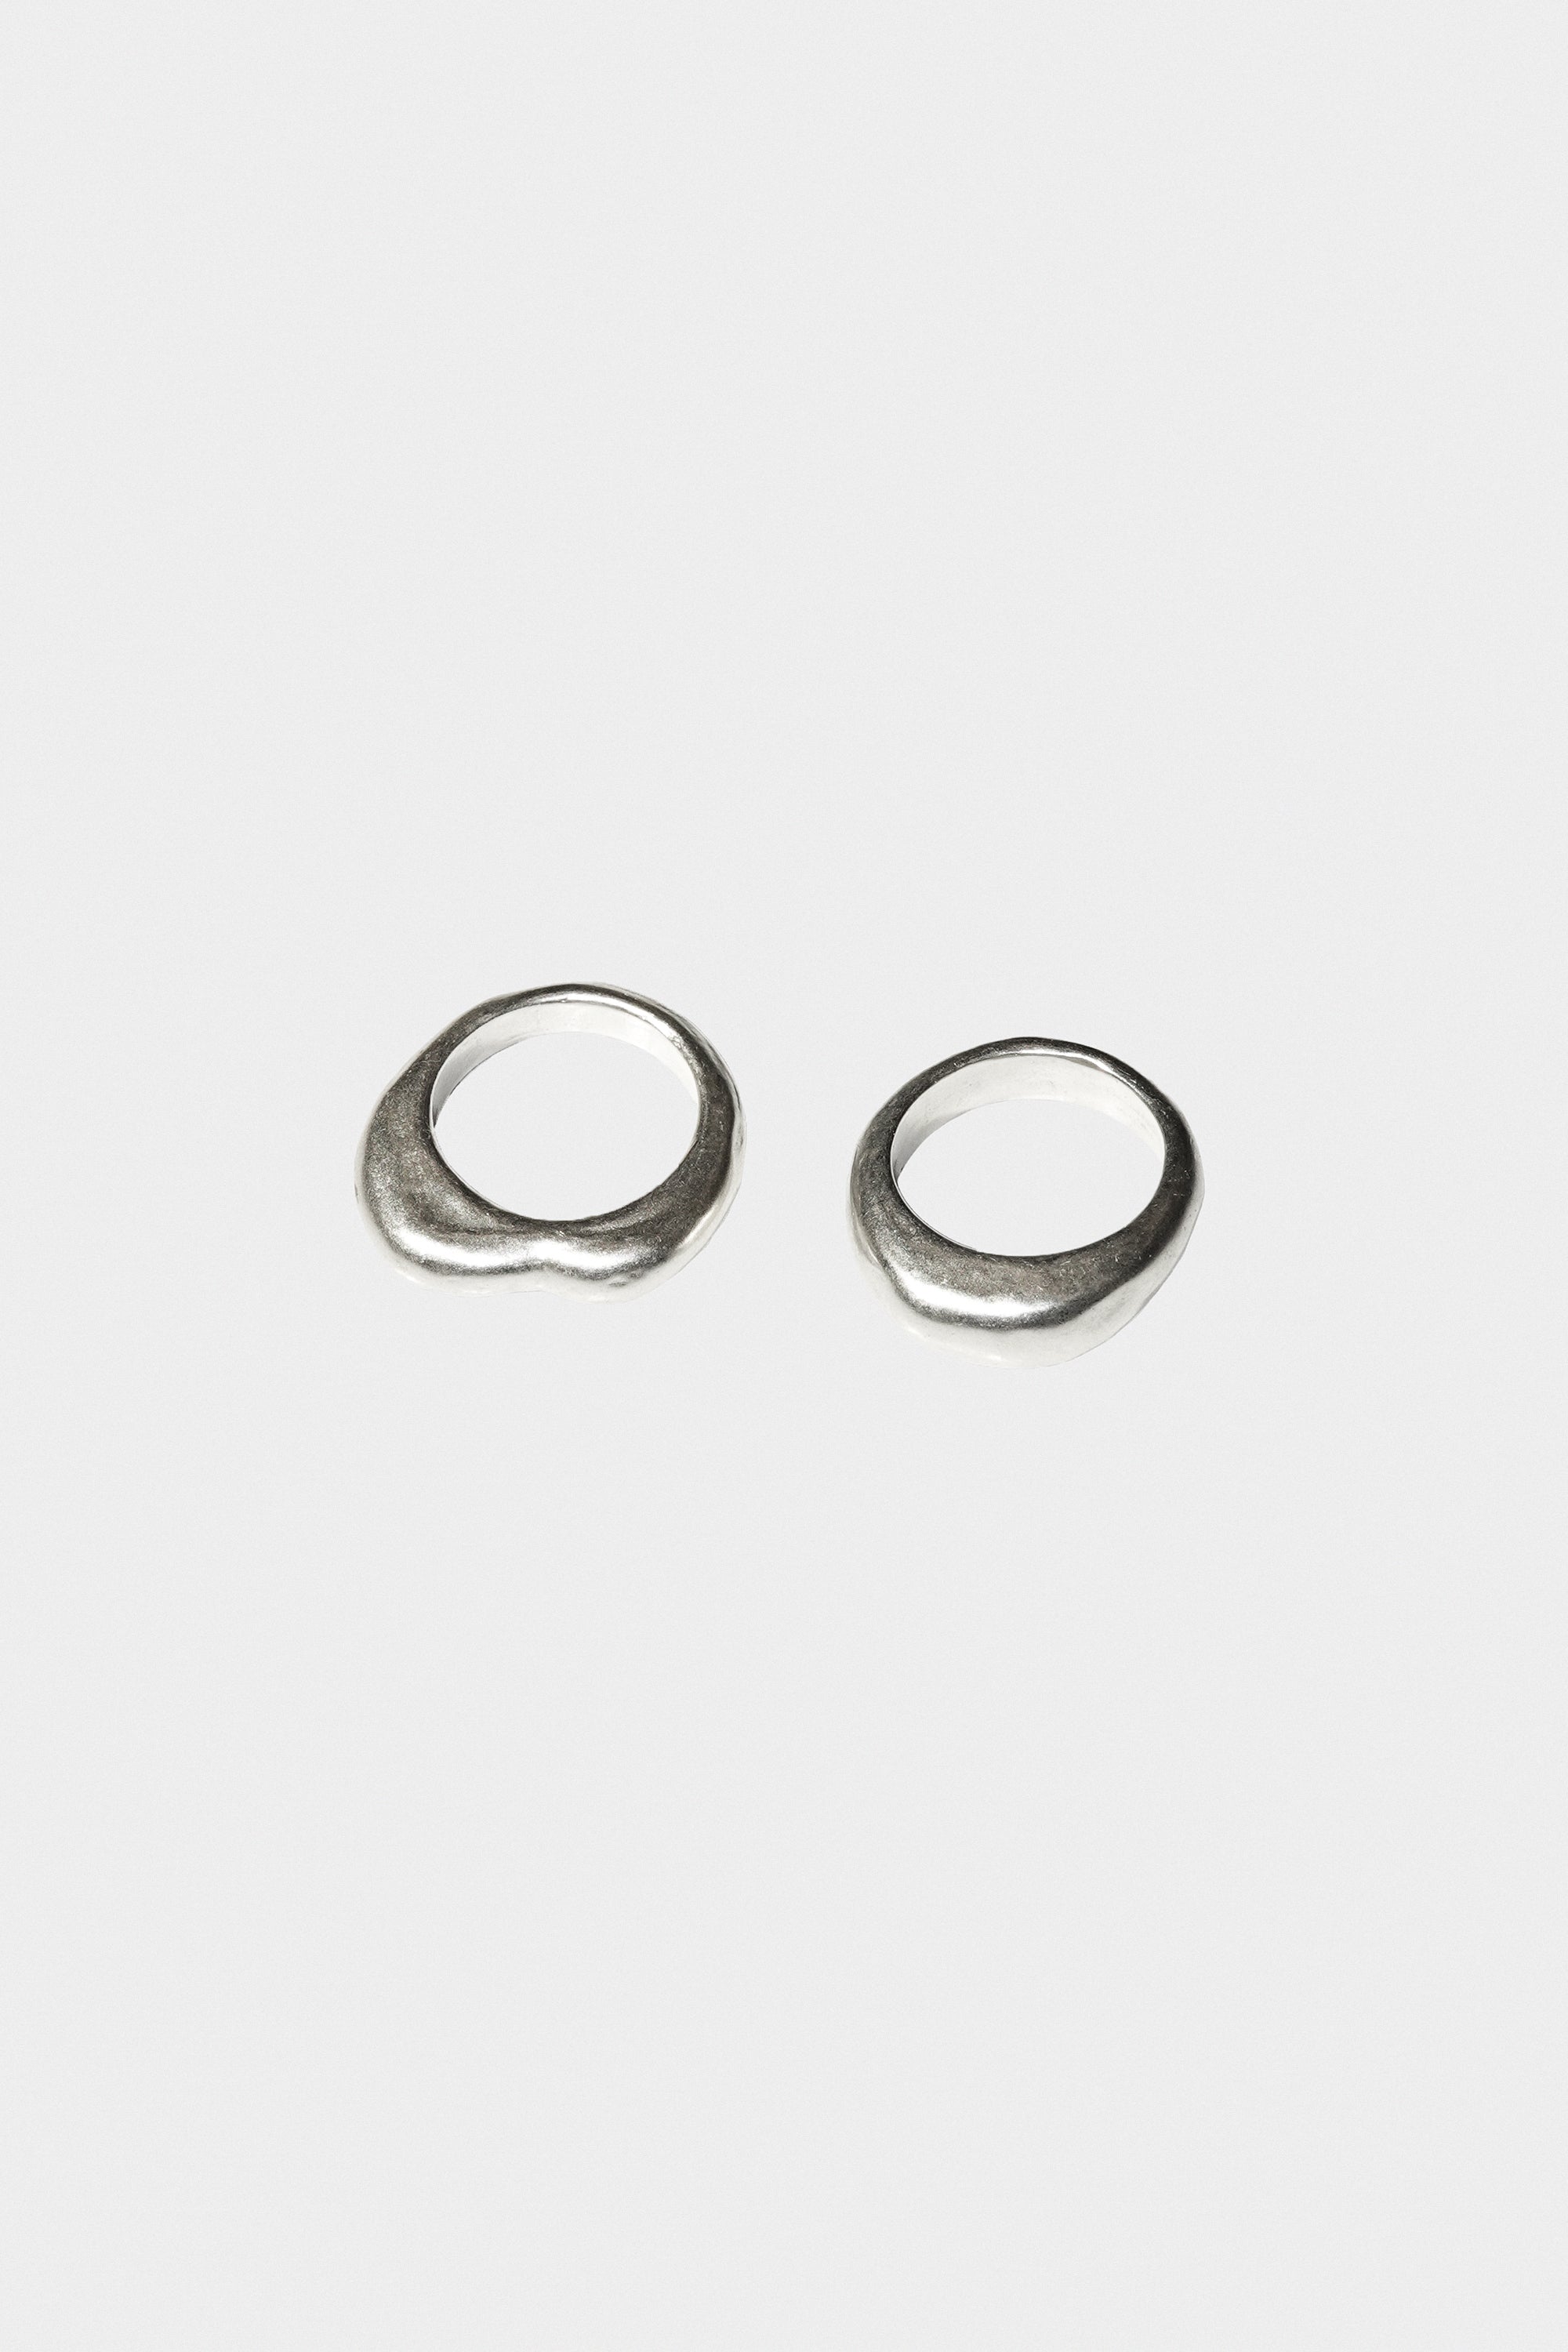 Cerrillos Stack in Sterling Silver by Oxbow